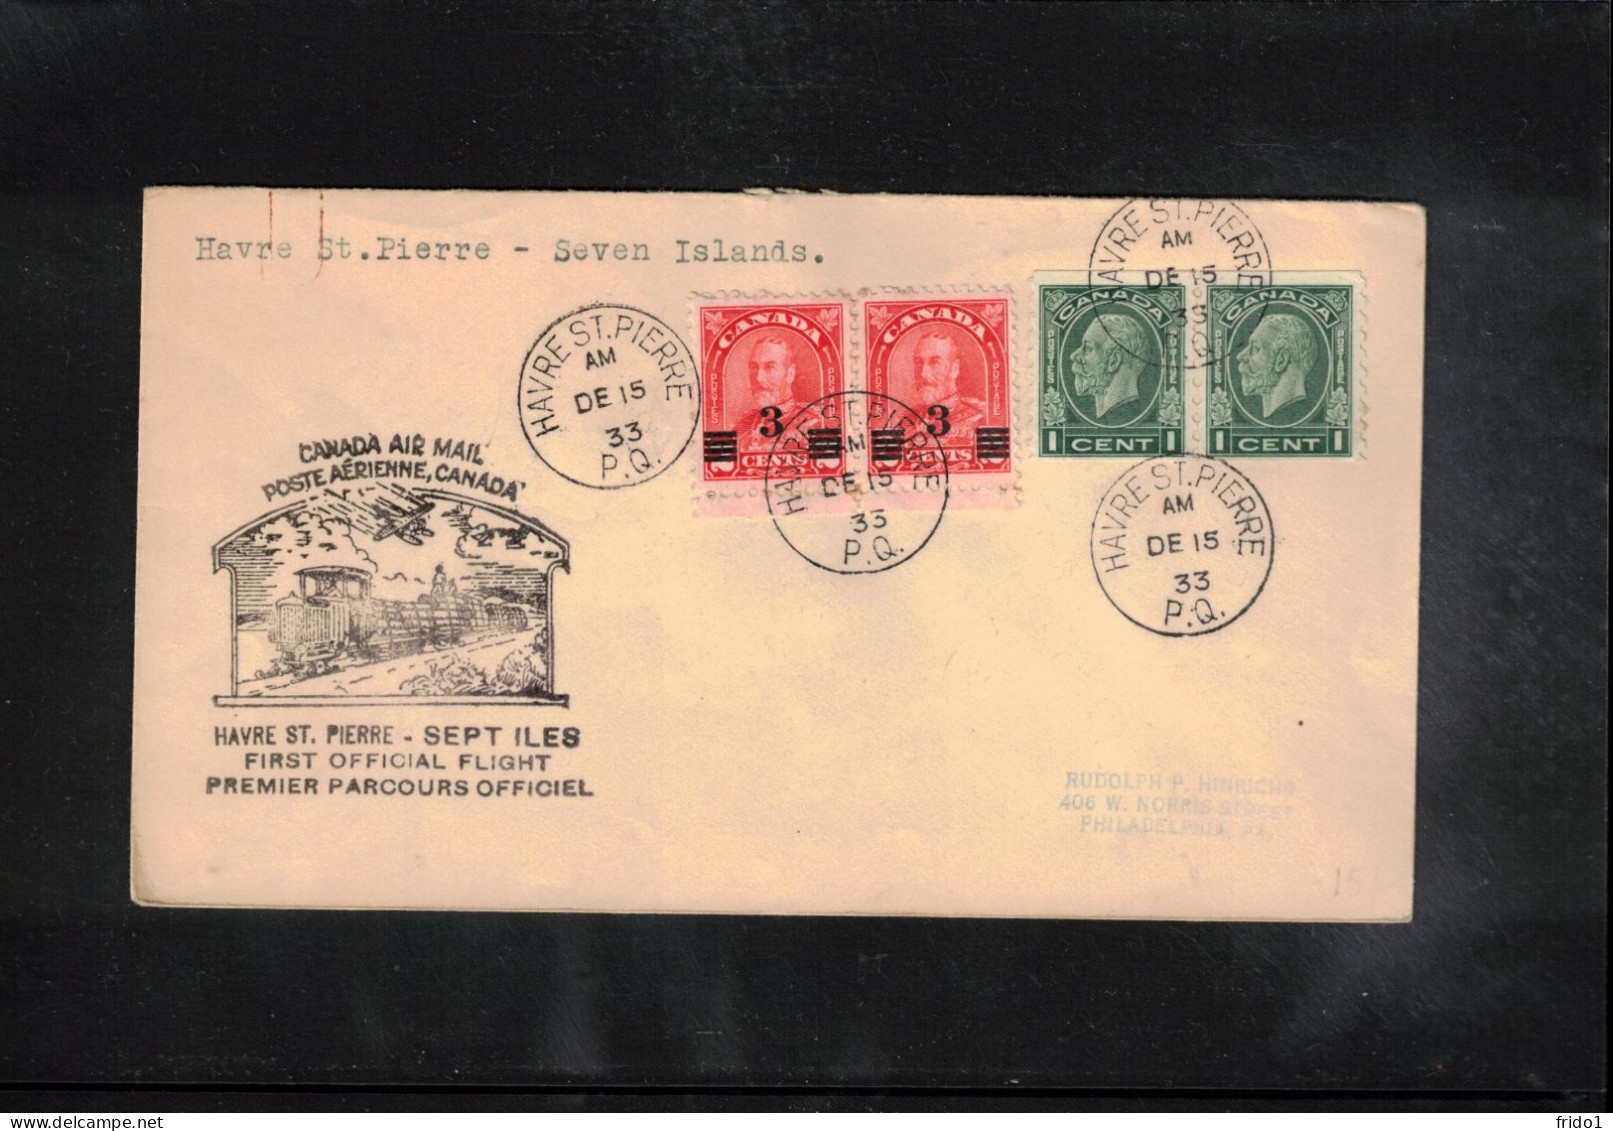 Canada 1933 Canada Air Mail - First Official Flight Havre St.Pierre - Seven Islands - Premiers Vols